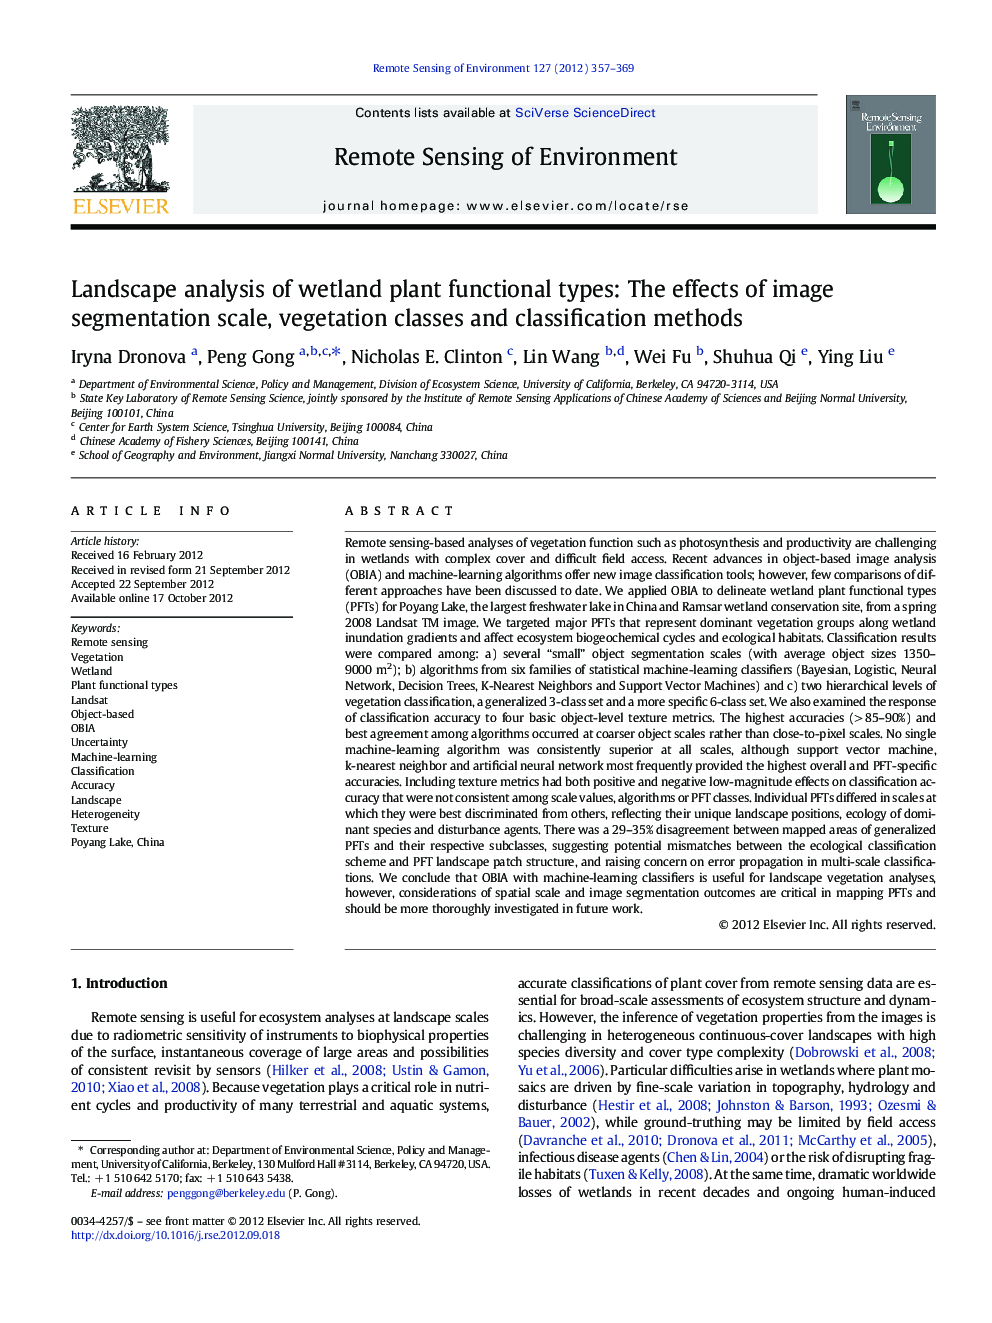 Landscape analysis of wetland plant functional types: The effects of image segmentation scale, vegetation classes and classification methods